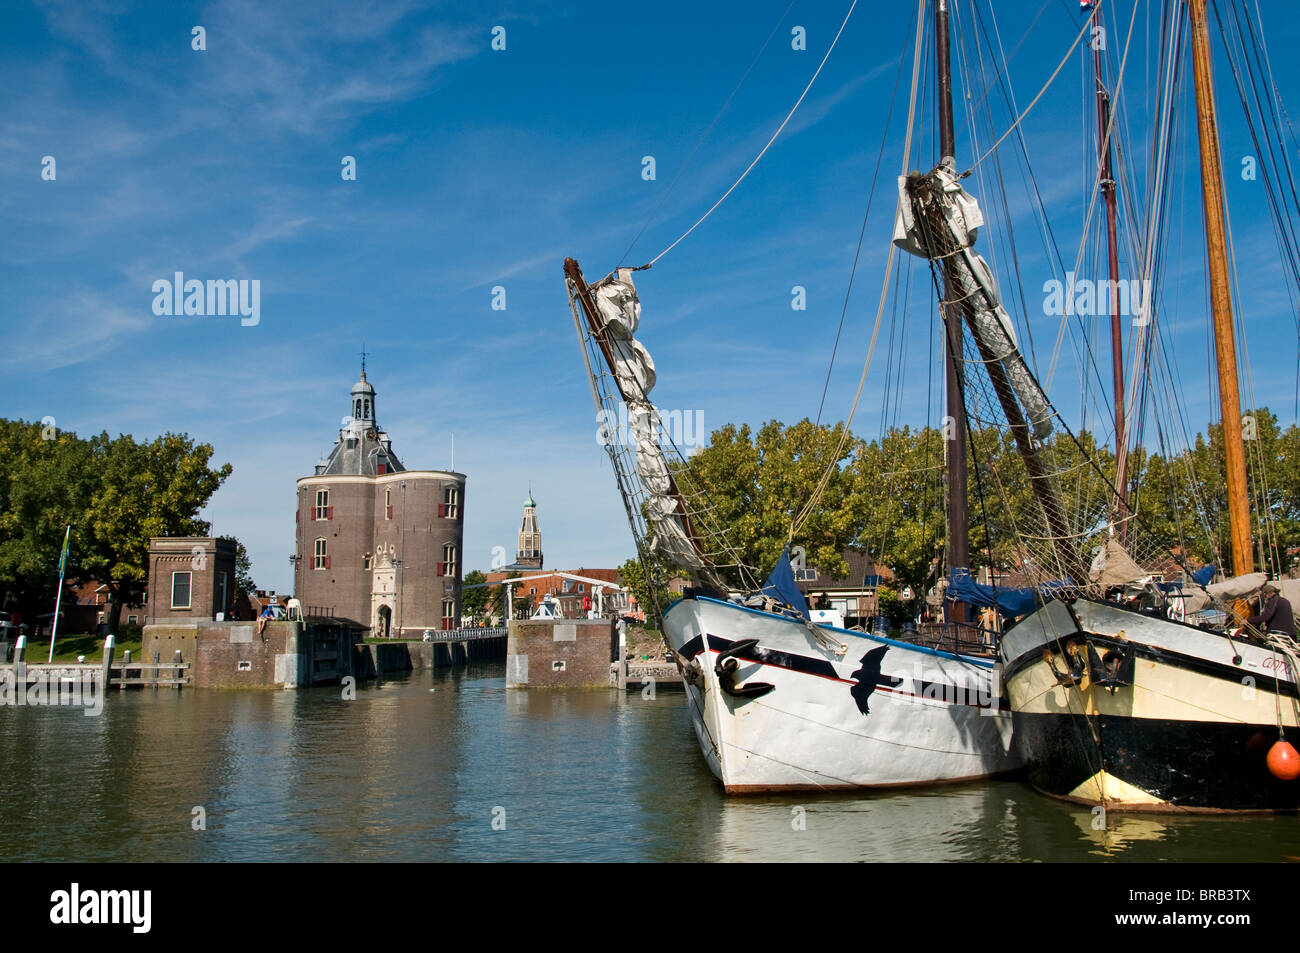 The Drommedaris was built as a defence tower as part of the 16th-century town walls. old Port Harbour  VOC Dutch The Netherlands Holland. Stock Photo